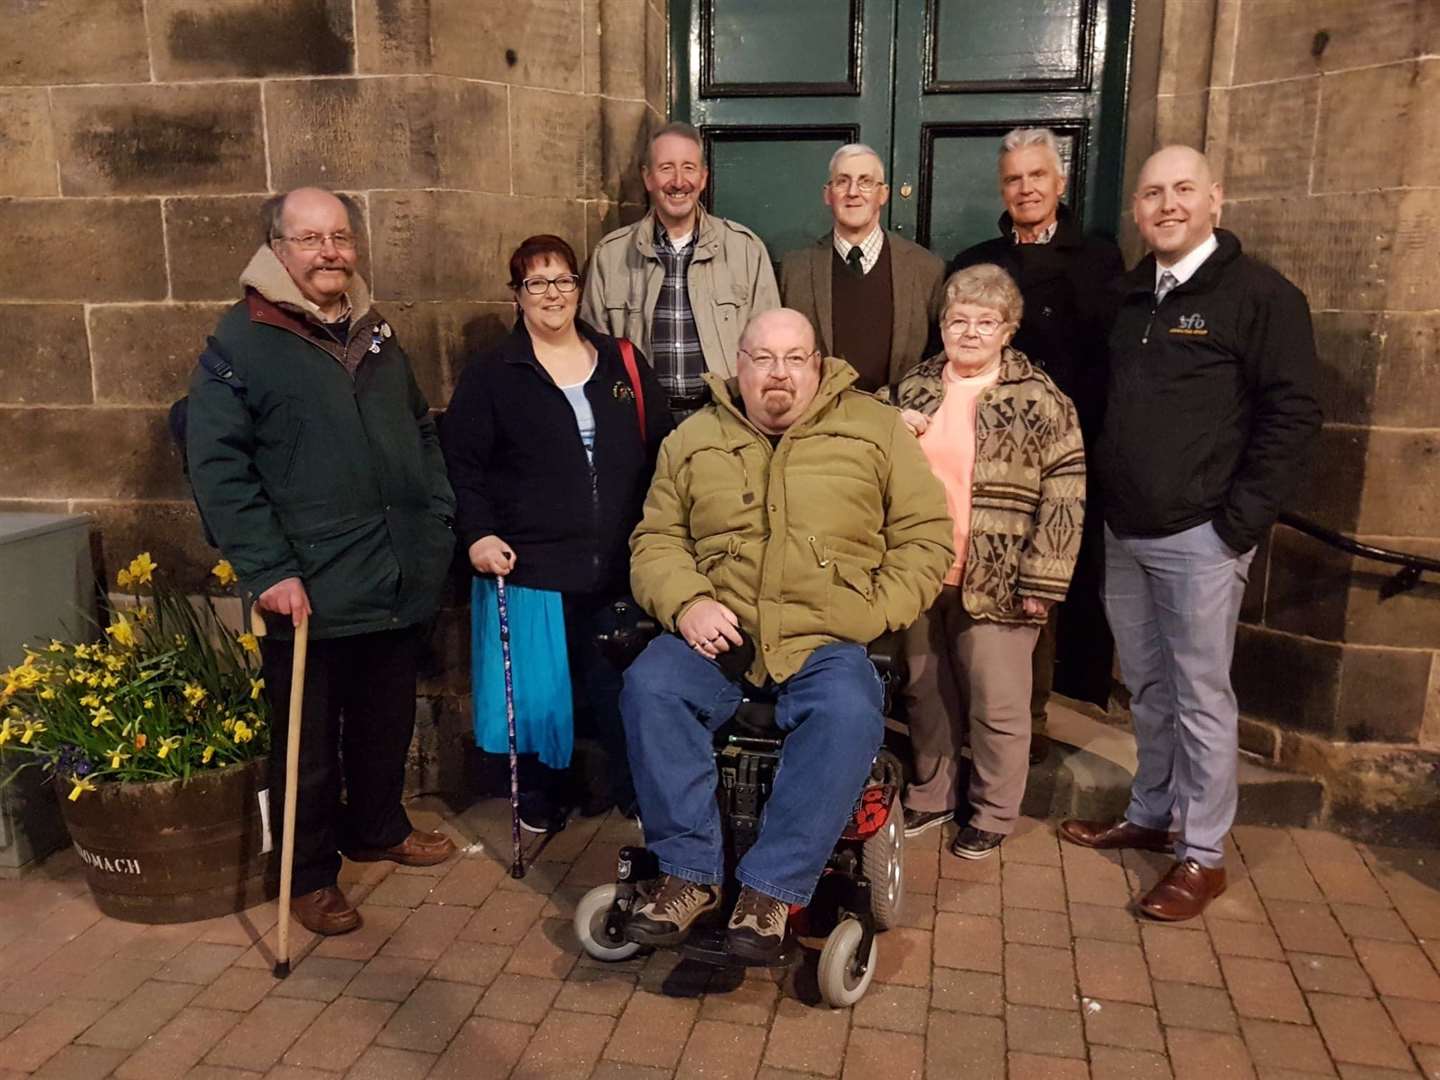 Lesley (third from right) with a previous Forres Community Council line-up.